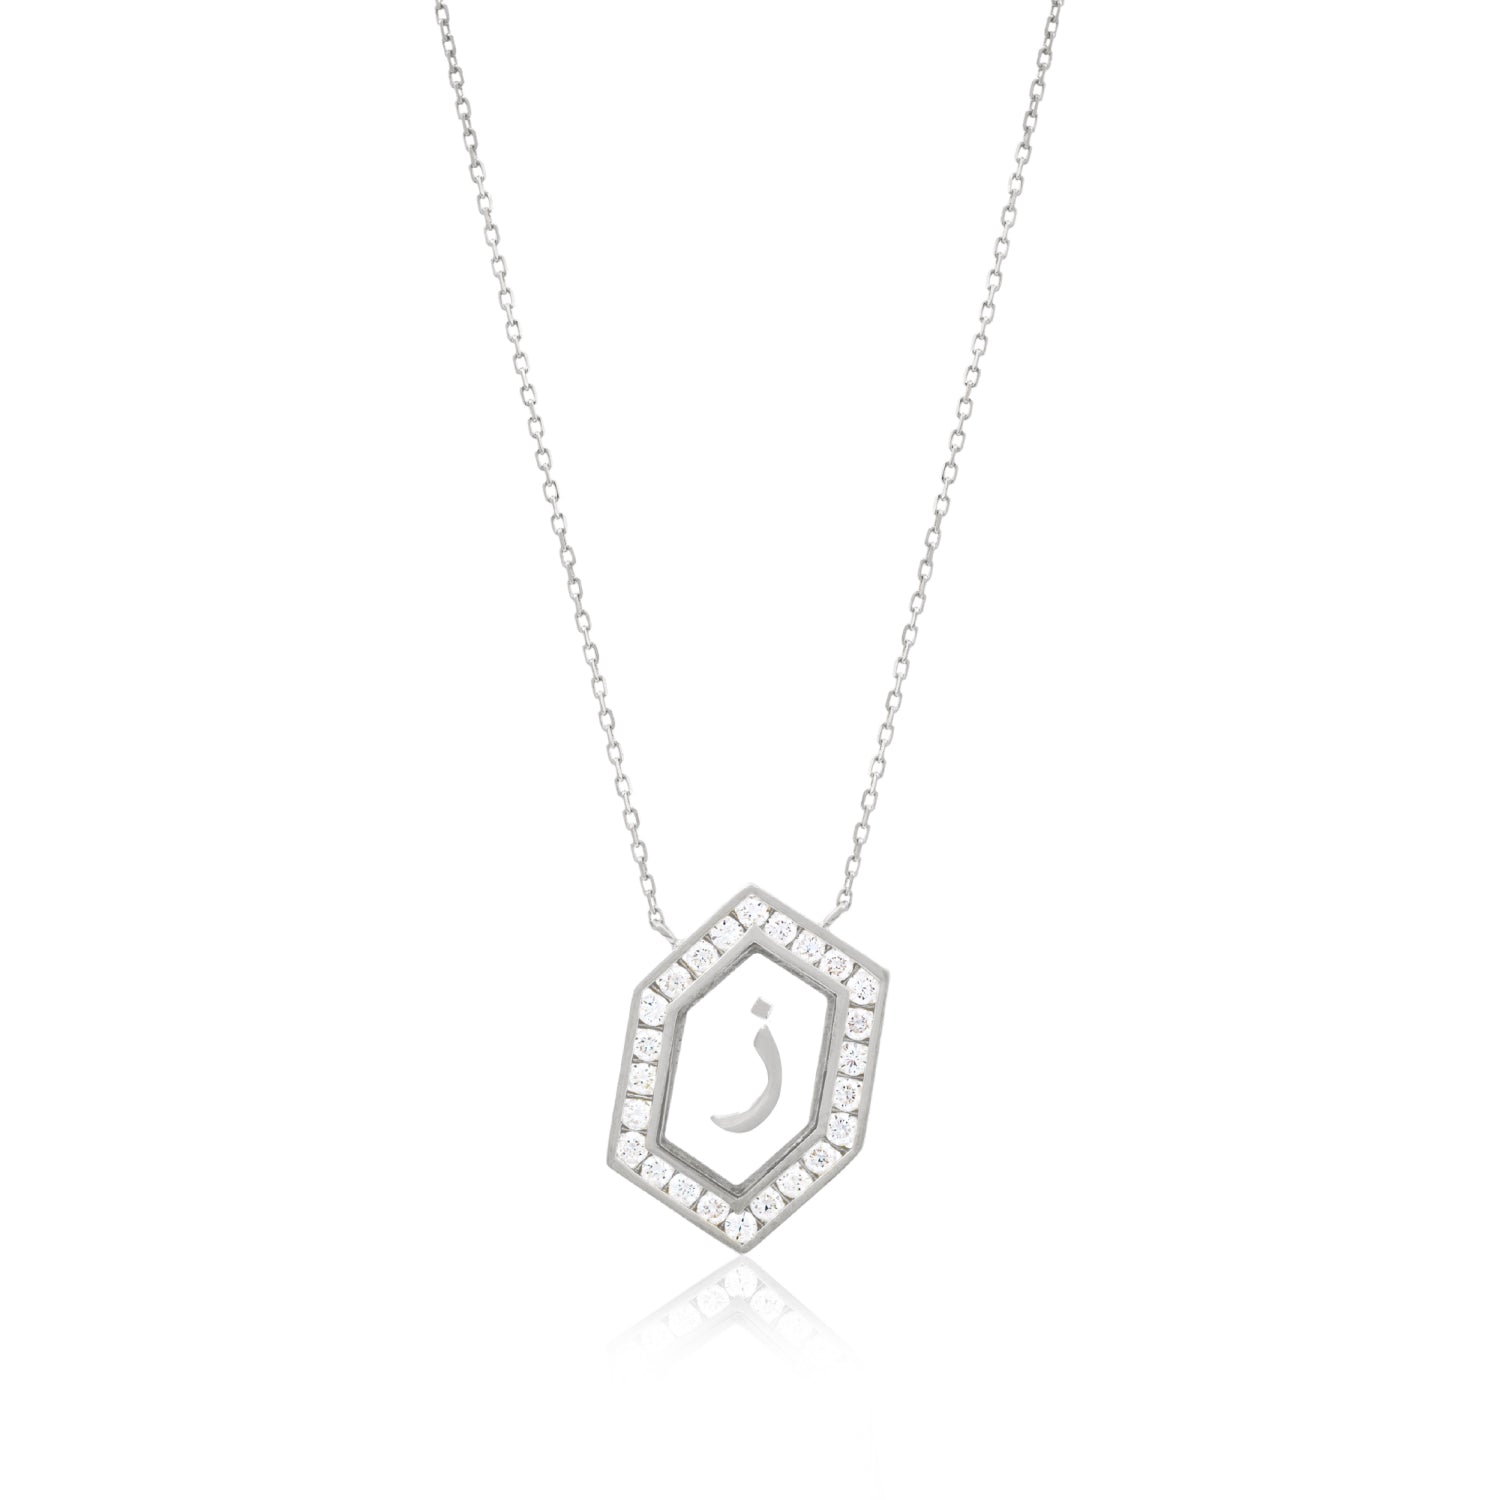 Qamoos 1.0 Letter ز Diamond Necklace in White Gold